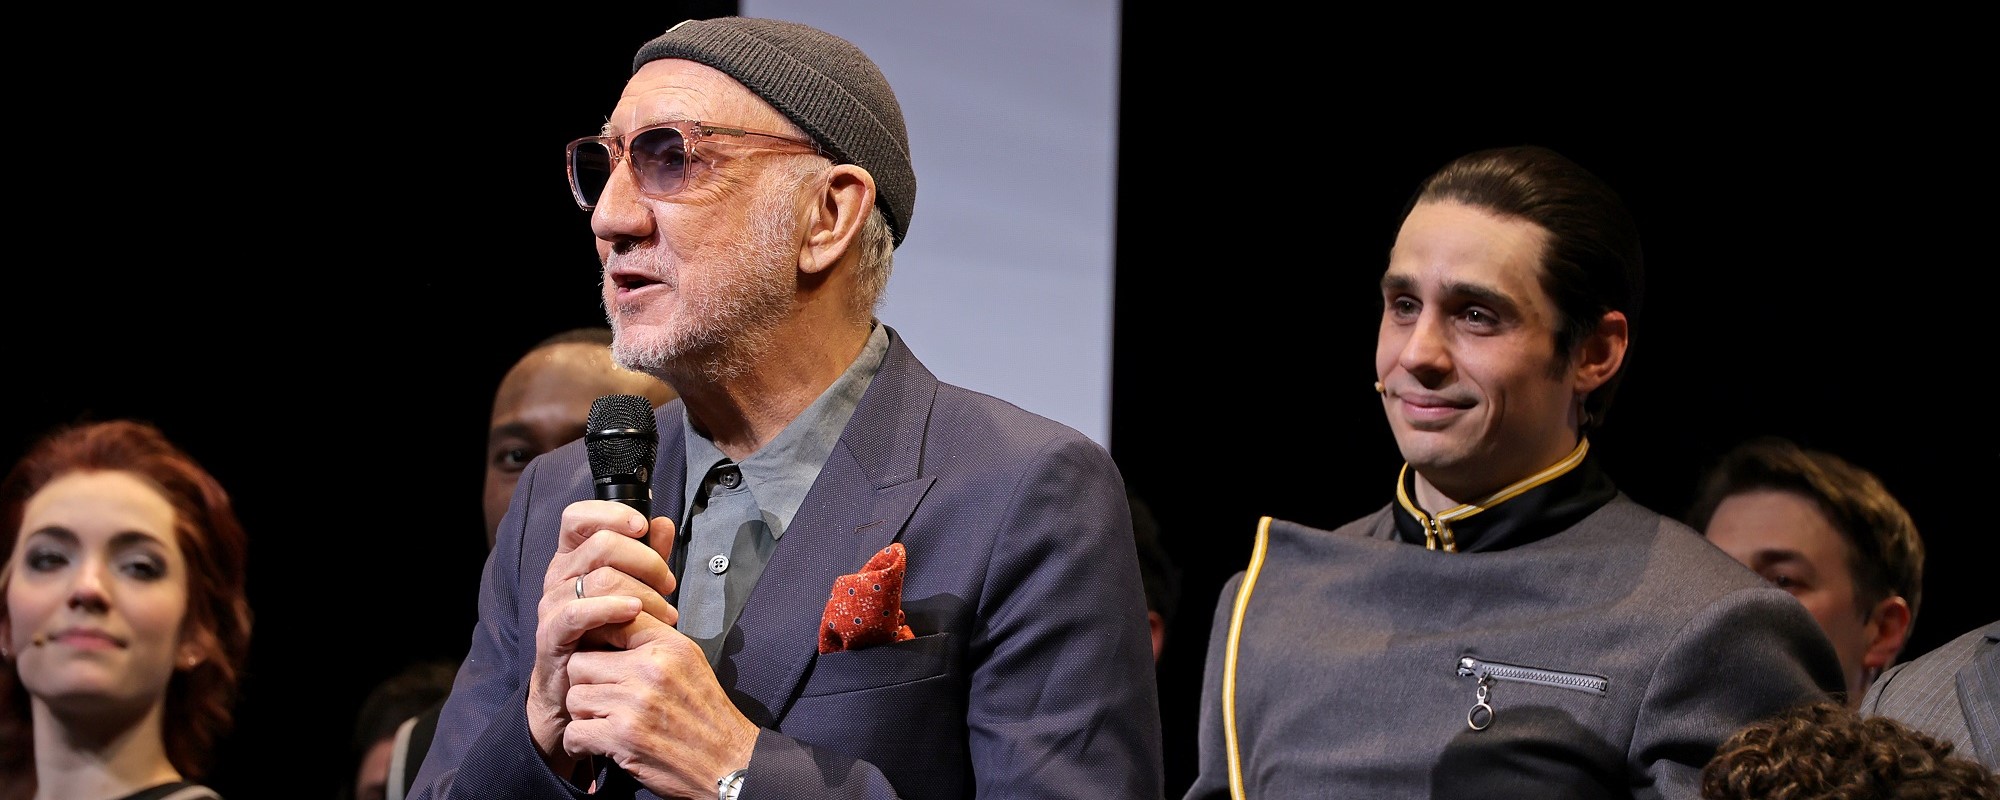 Pete Townshend Suggests Another Who-Related Project Could Be Turned into a Musical